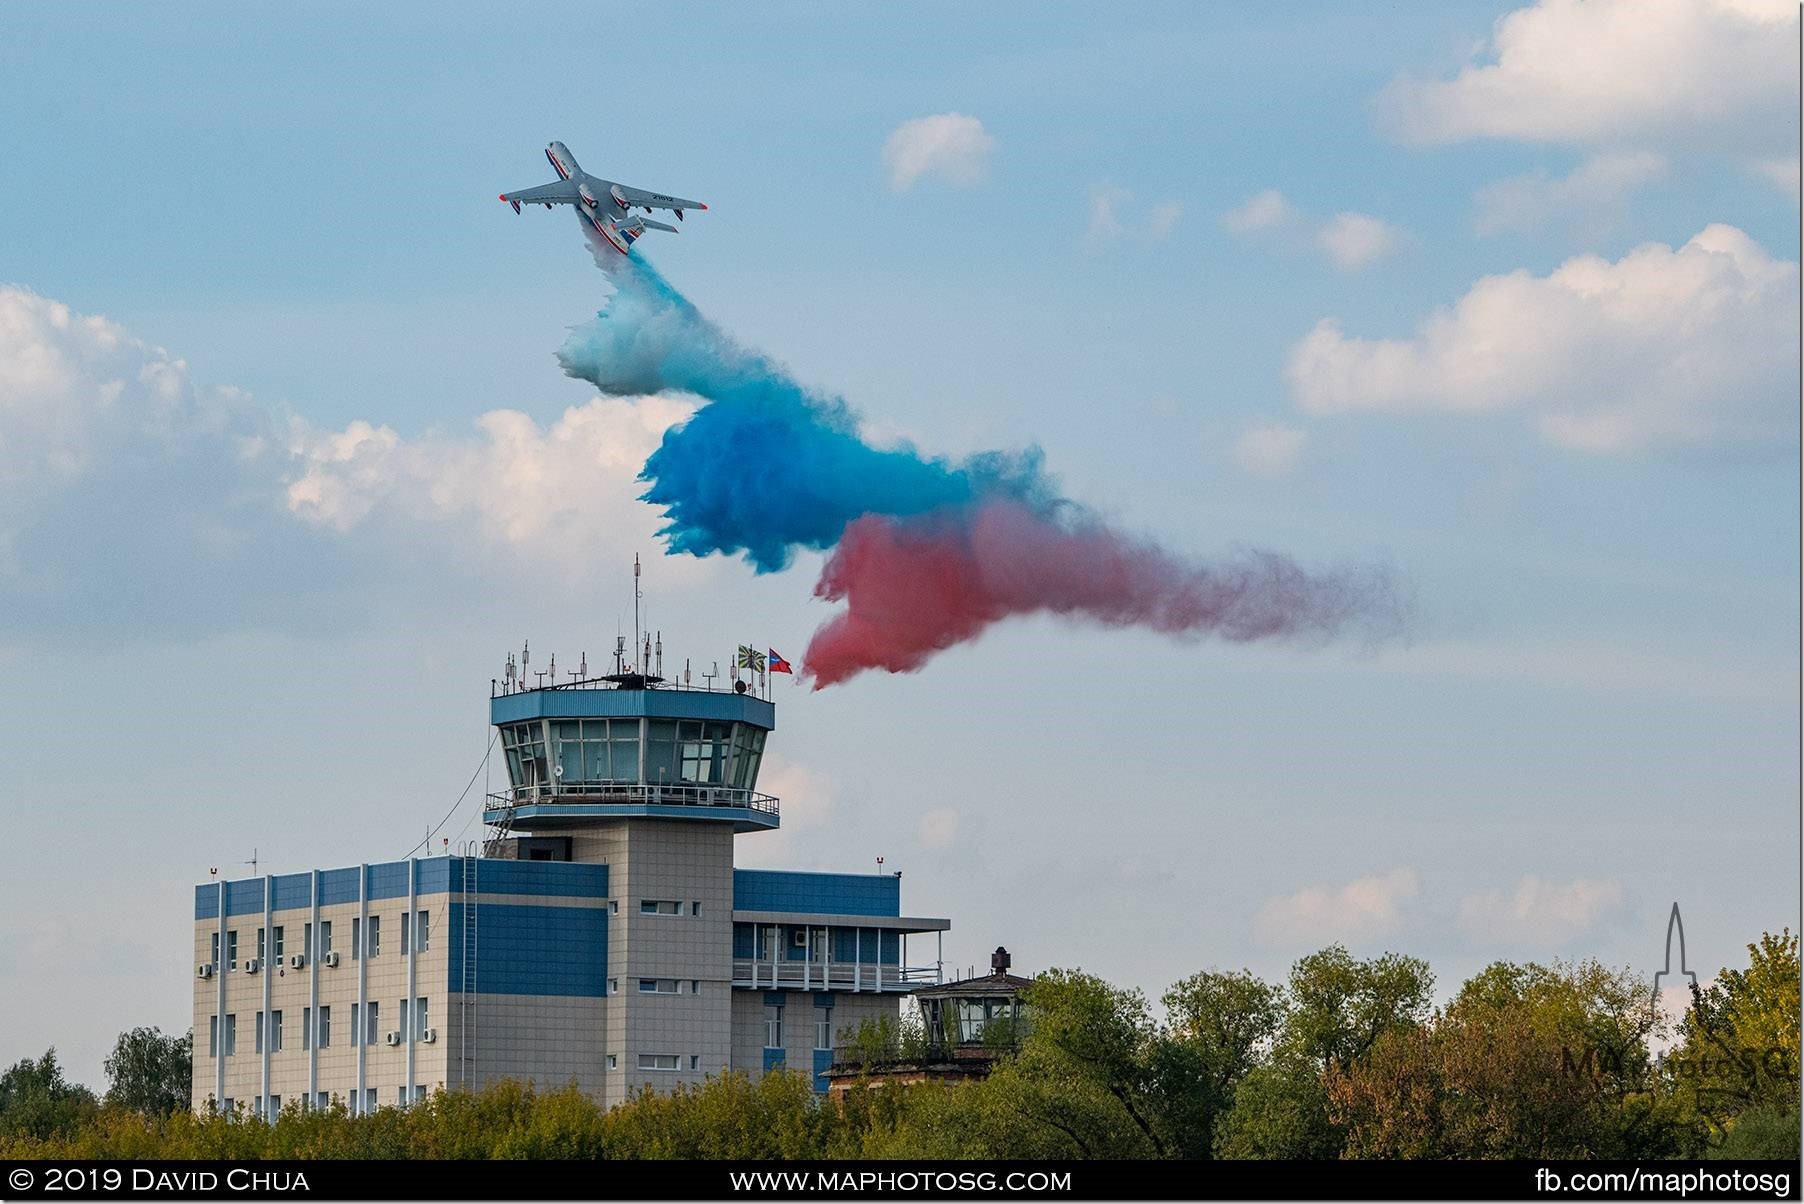 Beriev Be-200 Altair Fire fighting aircraft dispensing its load